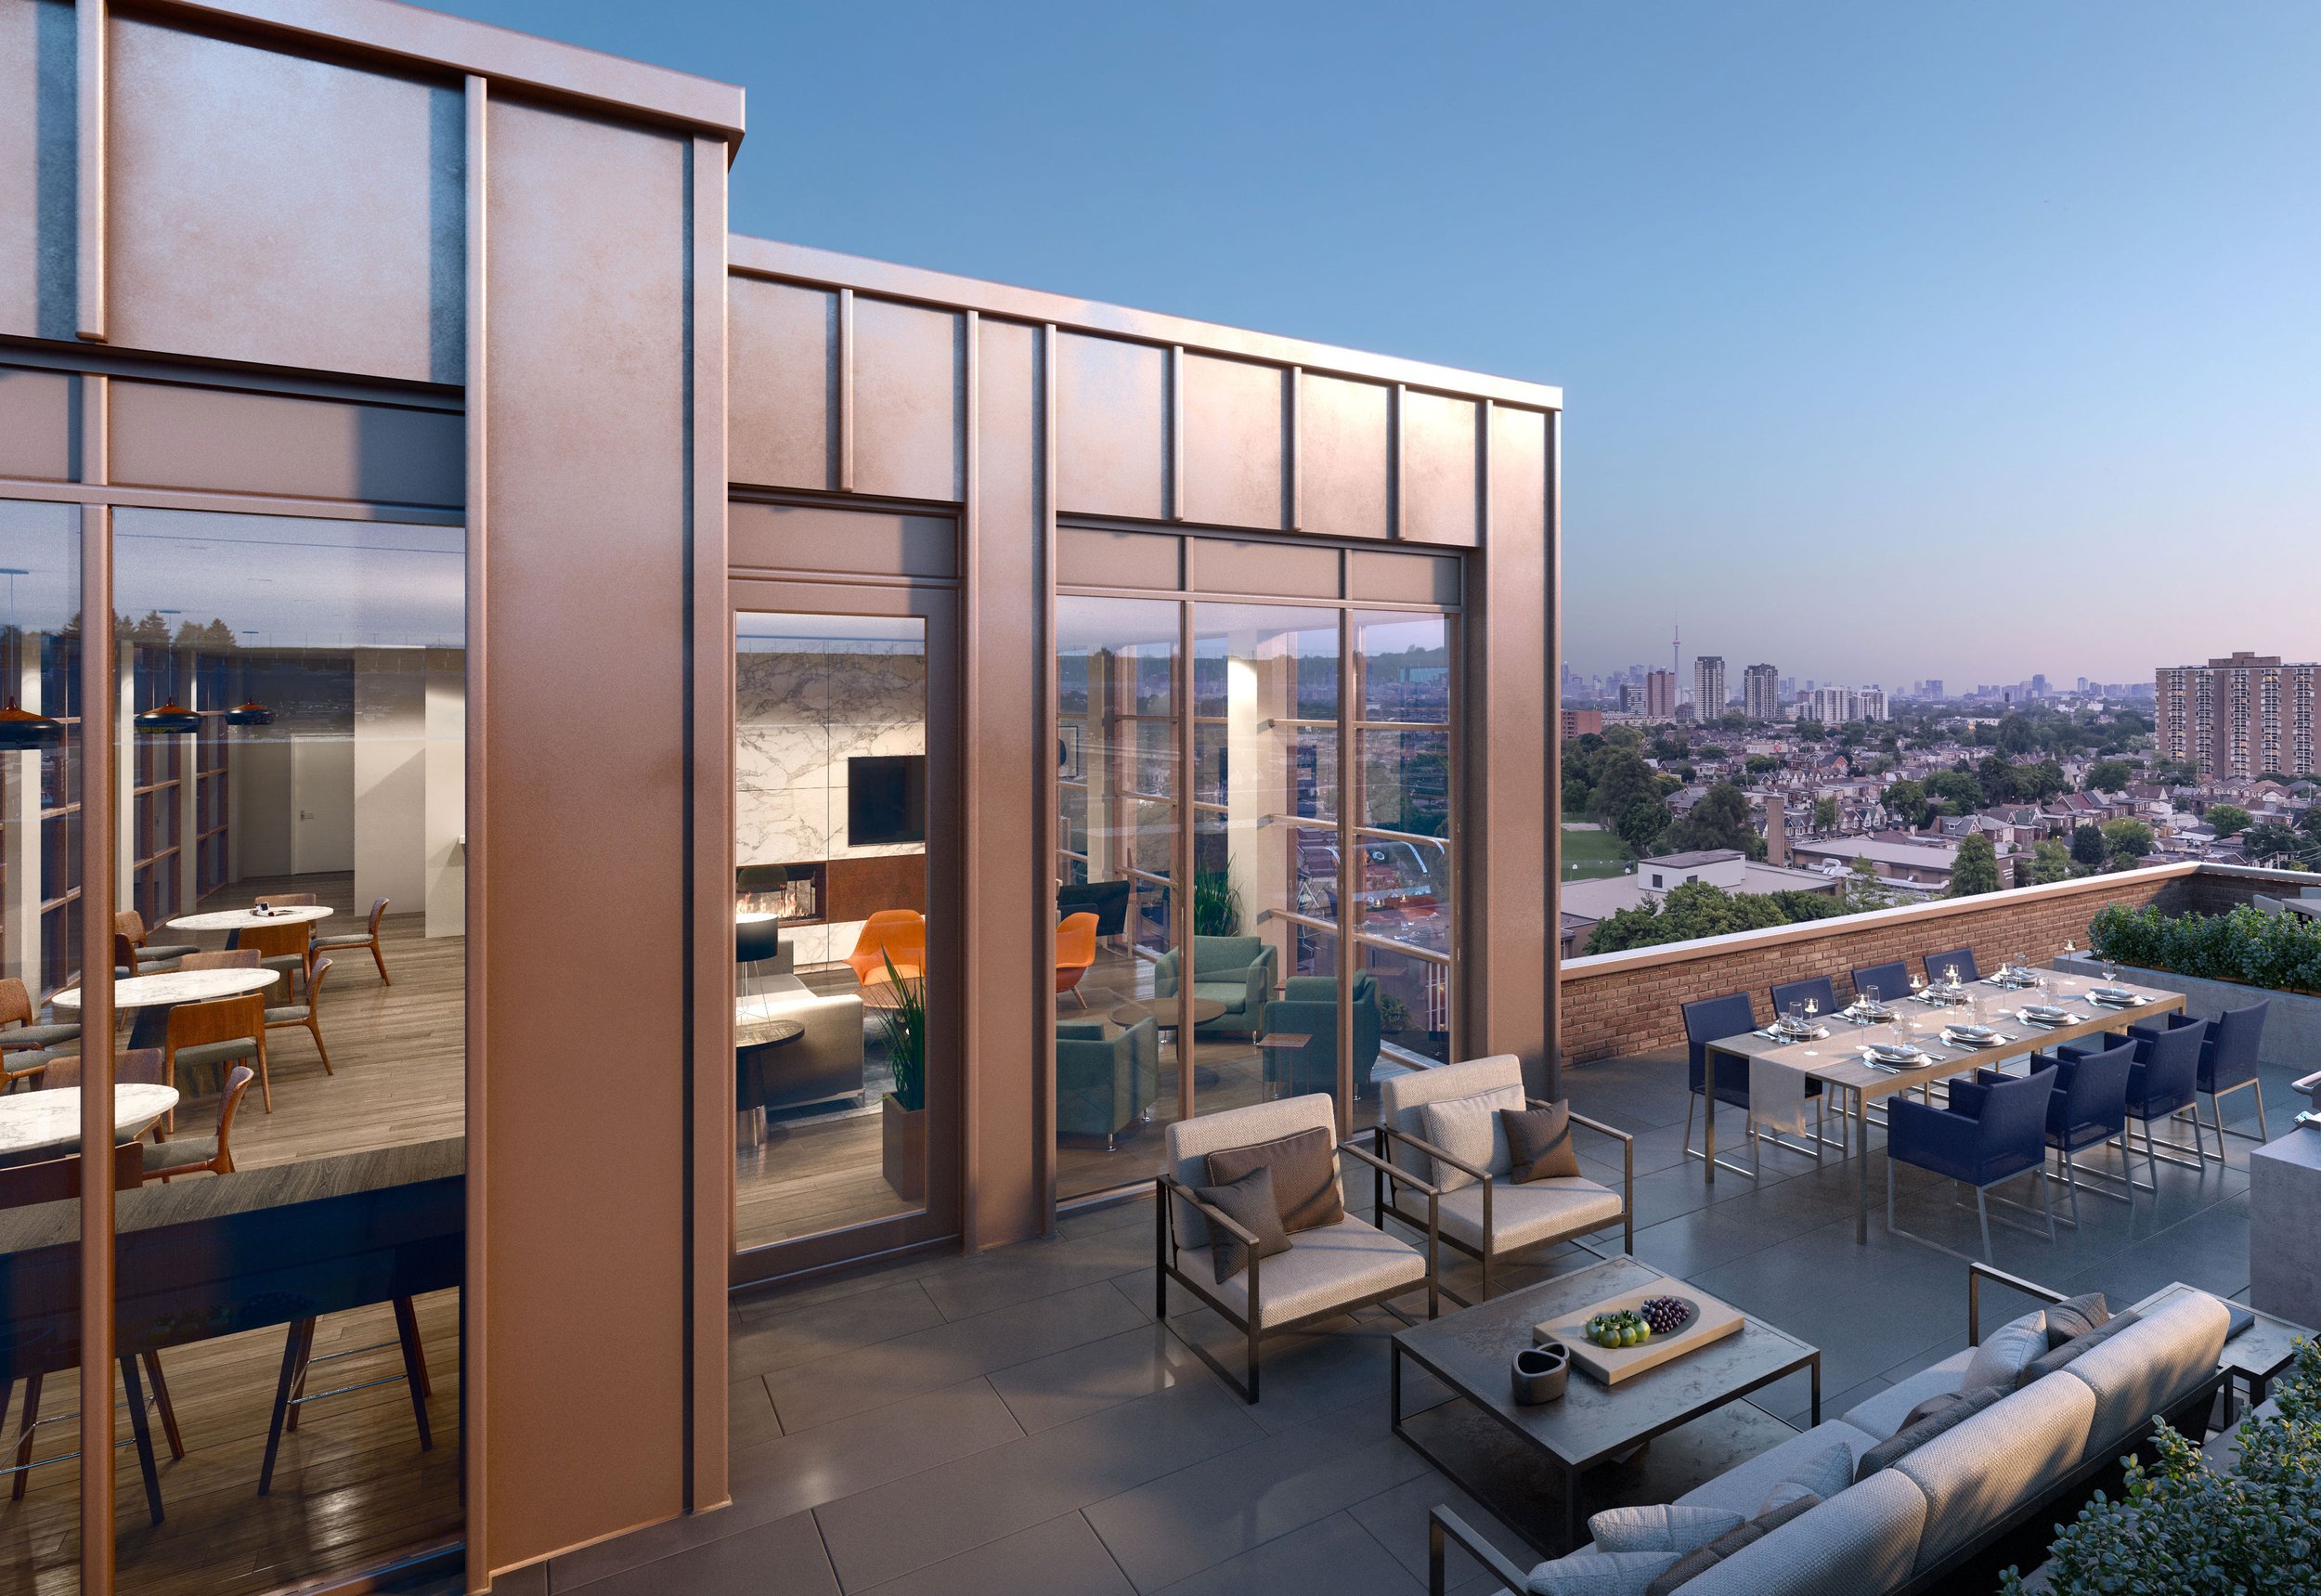 Rooftop-Terrace-at-SCOUT-Condos-by-Graywood-Developments-7-v114-full.jpeg